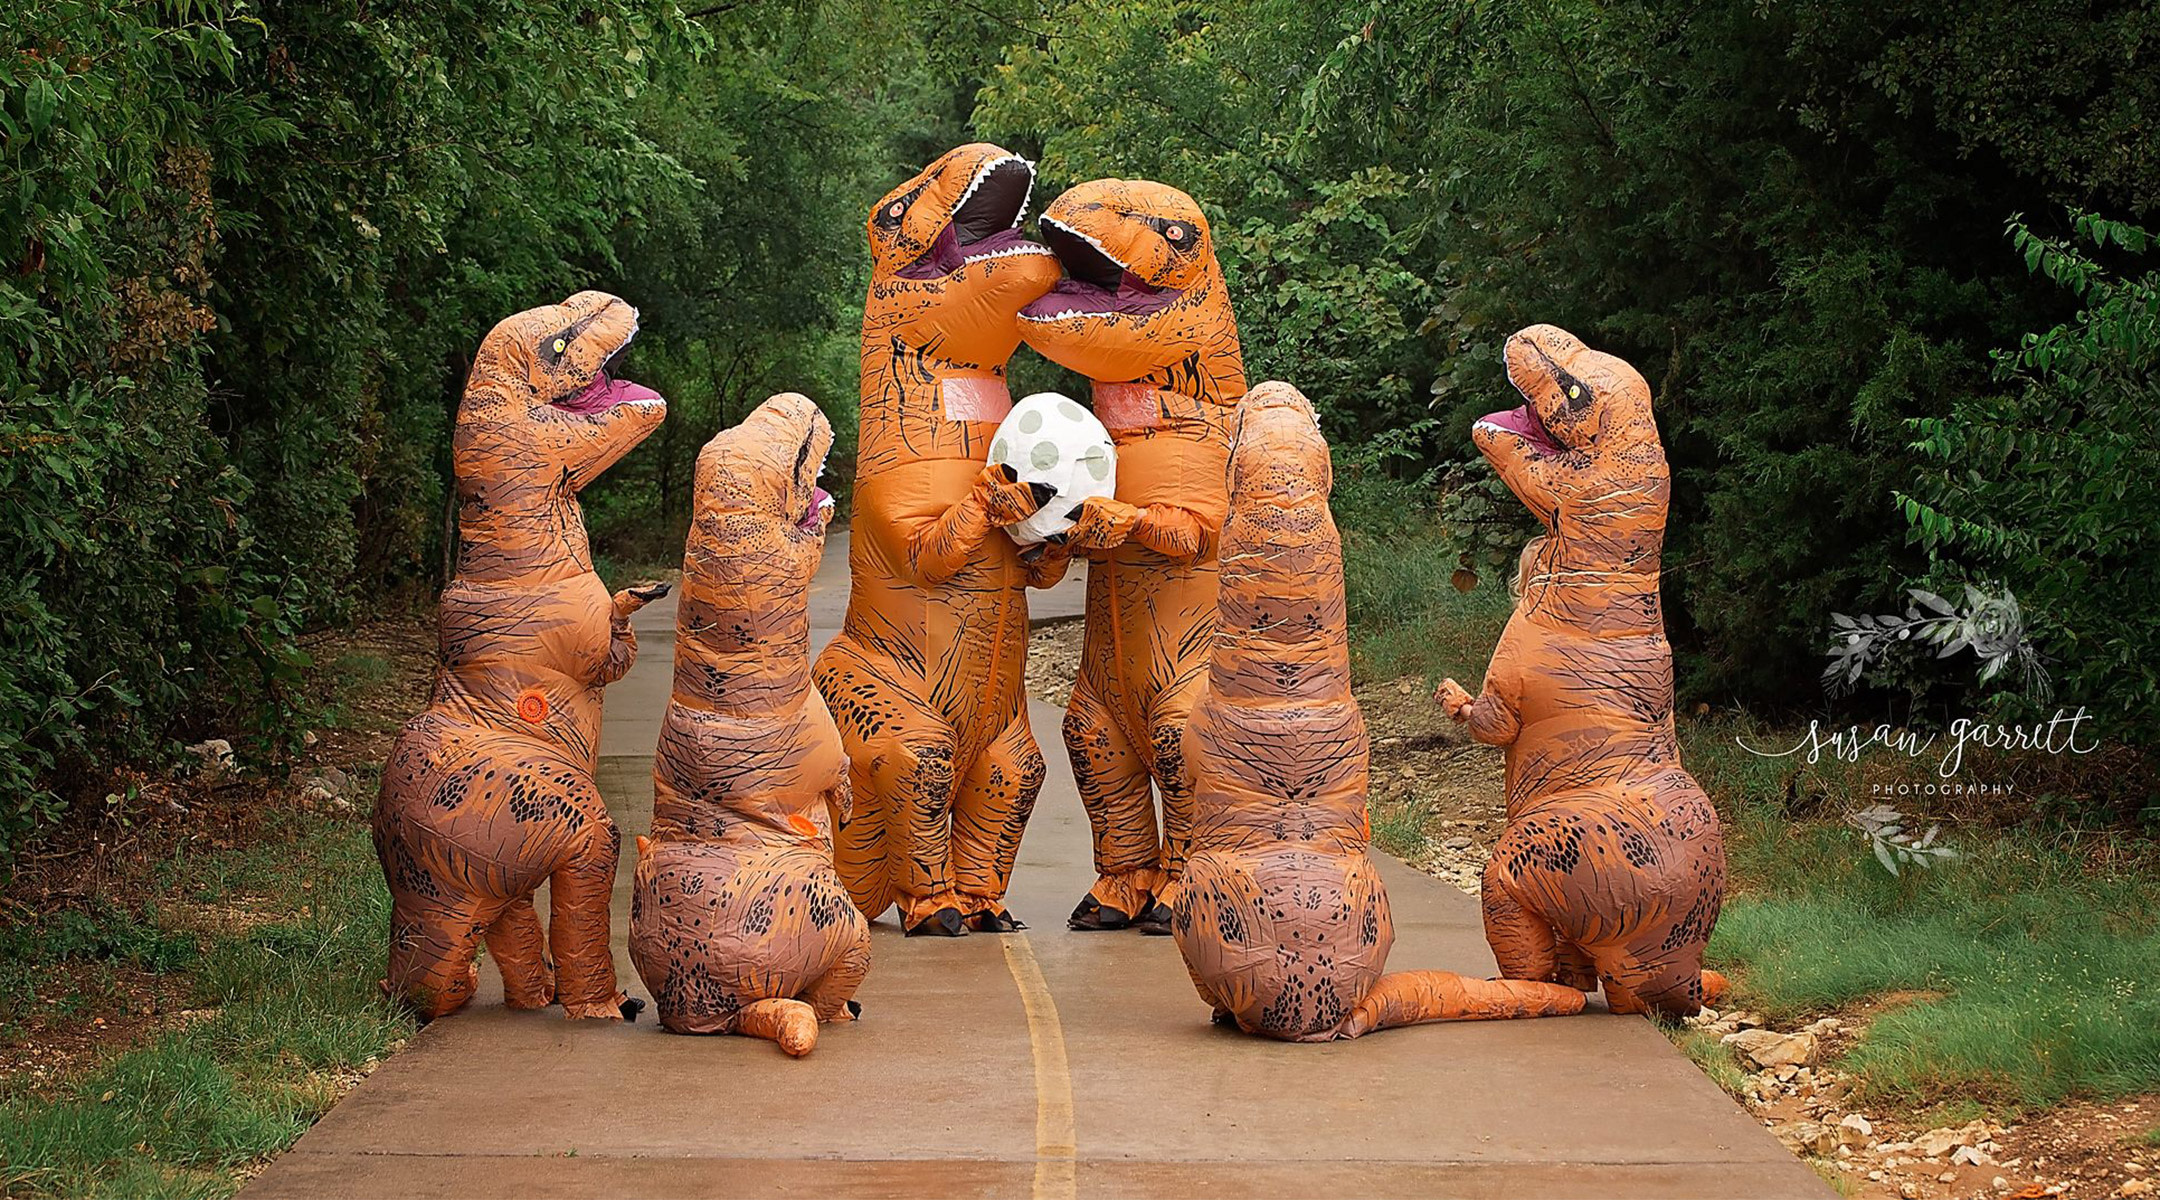 family dresses as dinosaurs to announce their baby